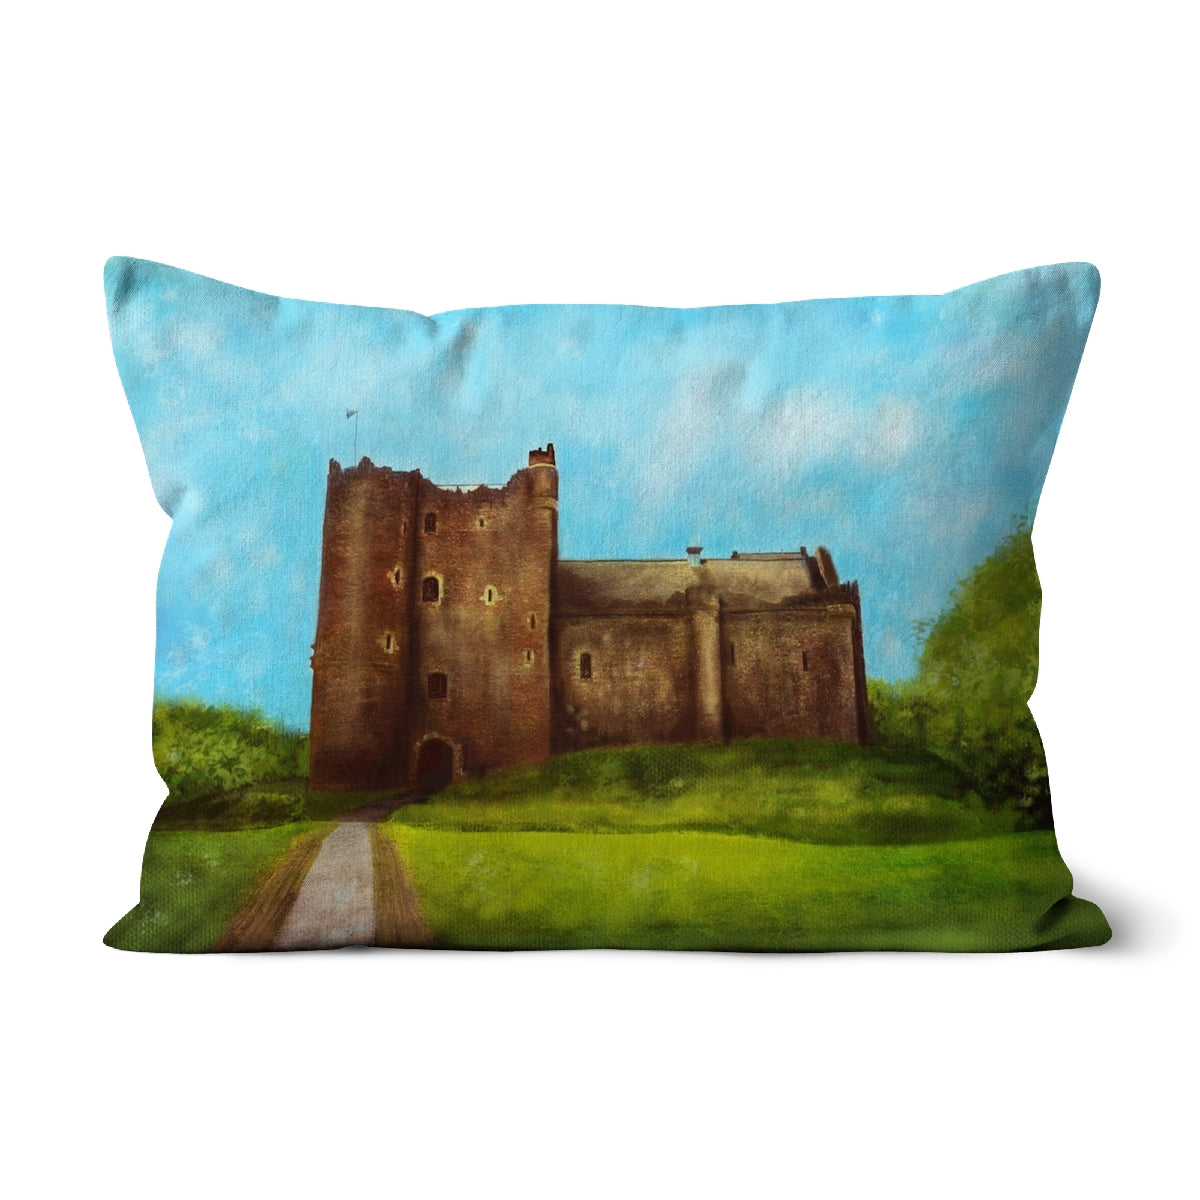 Doune Castle Art Gifts Cushion-Cushions-Historic & Iconic Scotland Art Gallery-Linen-19"x13"-Paintings, Prints, Homeware, Art Gifts From Scotland By Scottish Artist Kevin Hunter